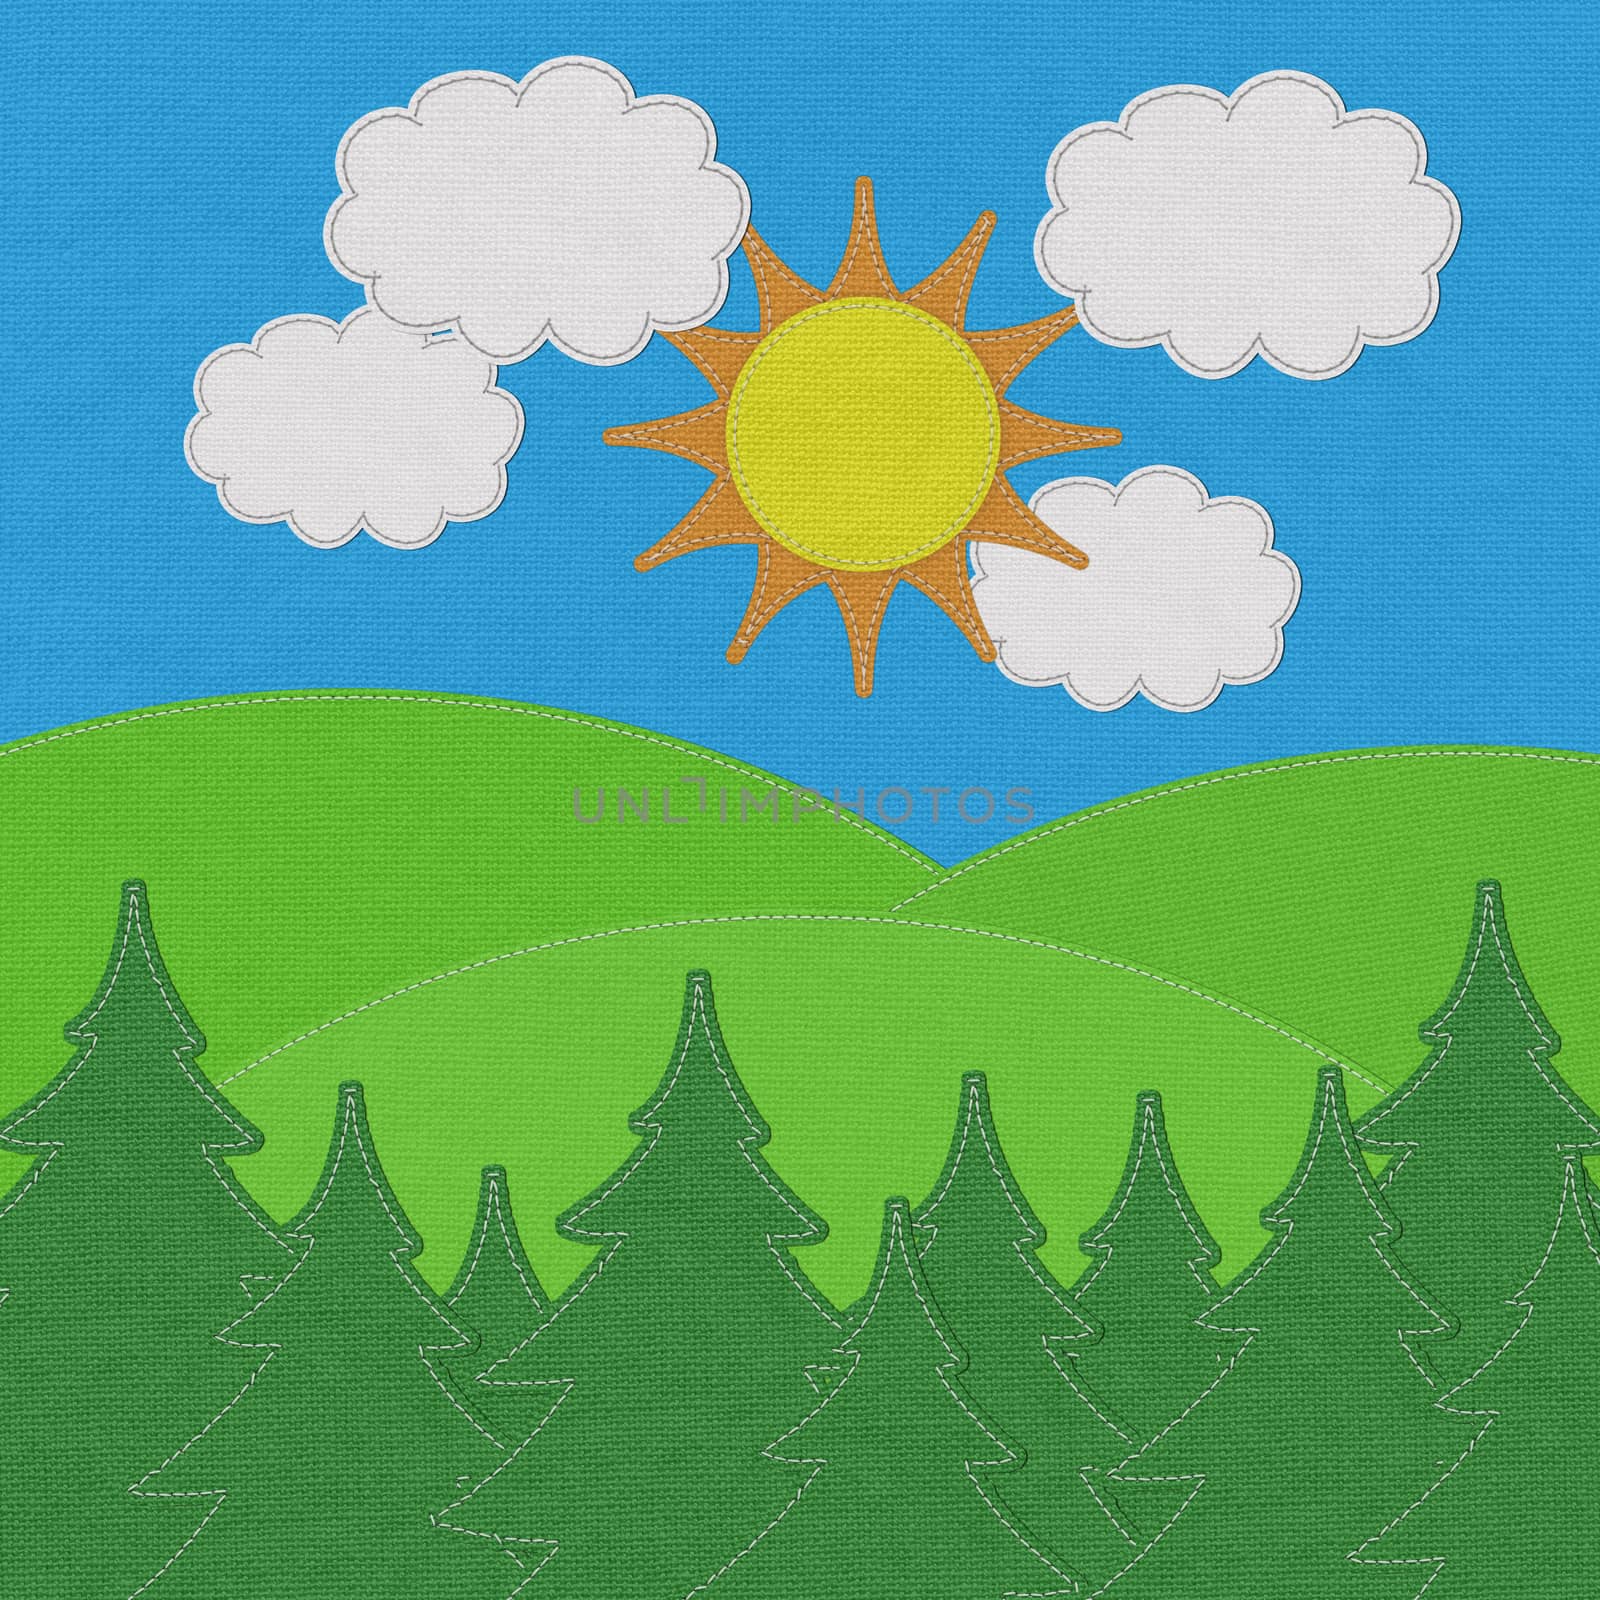 Landscape with pine forests in the mountains with stitch style on fabric background